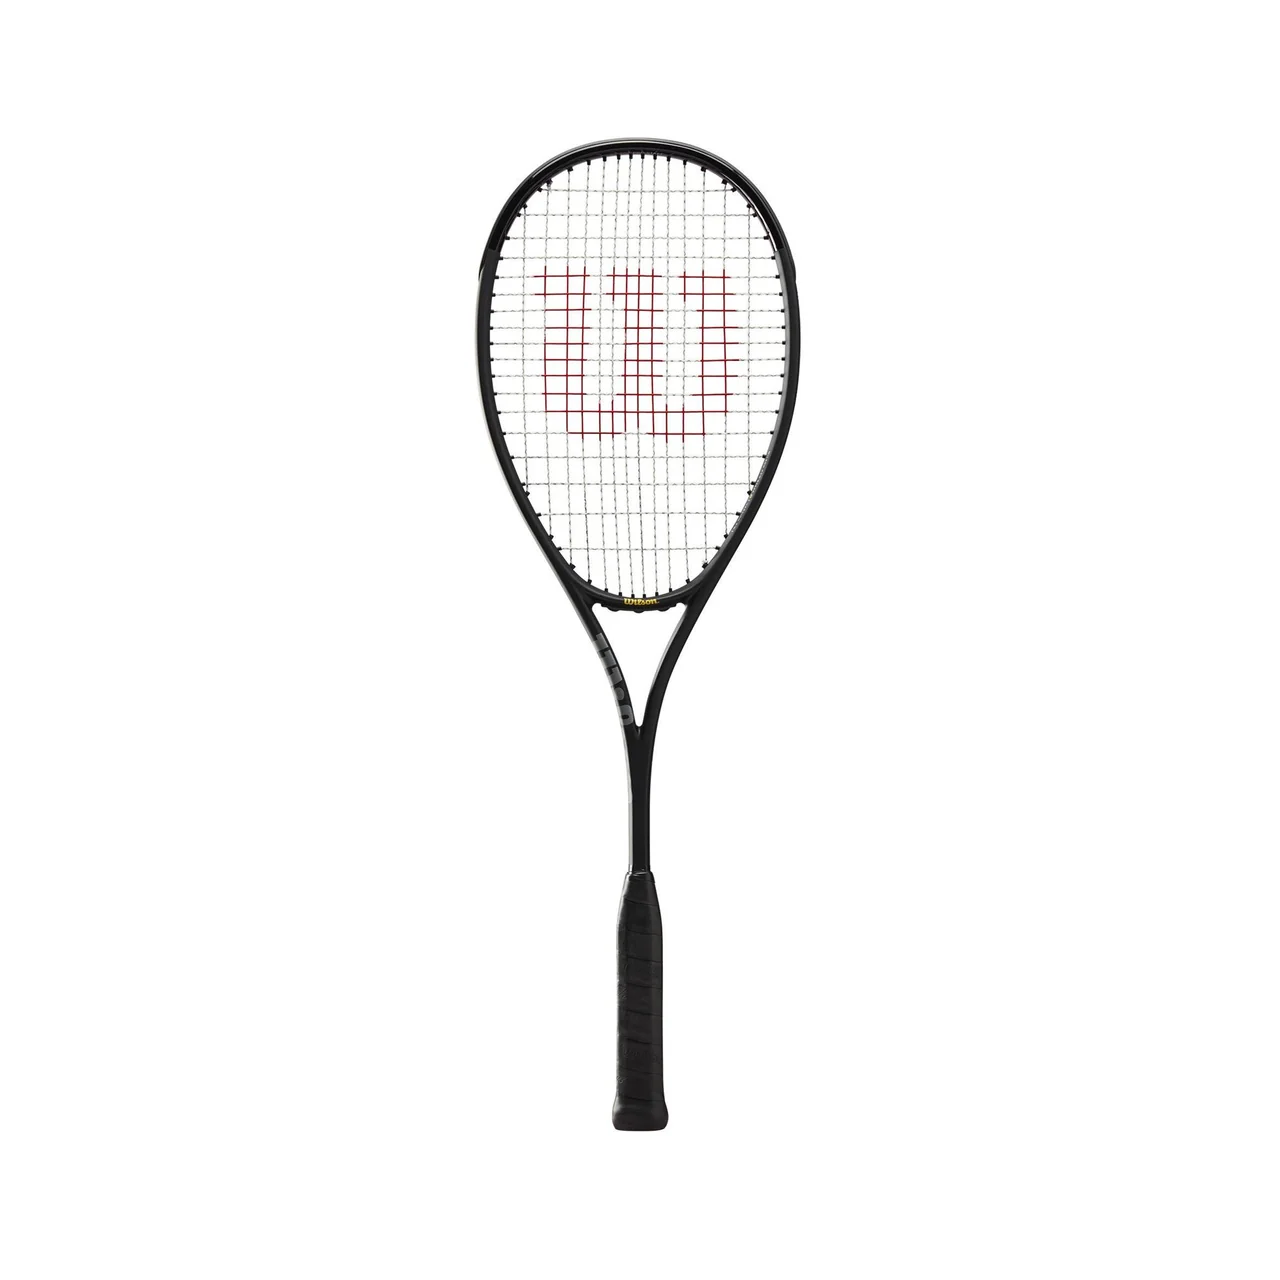 Wilson Pro Staff Countervail Squash